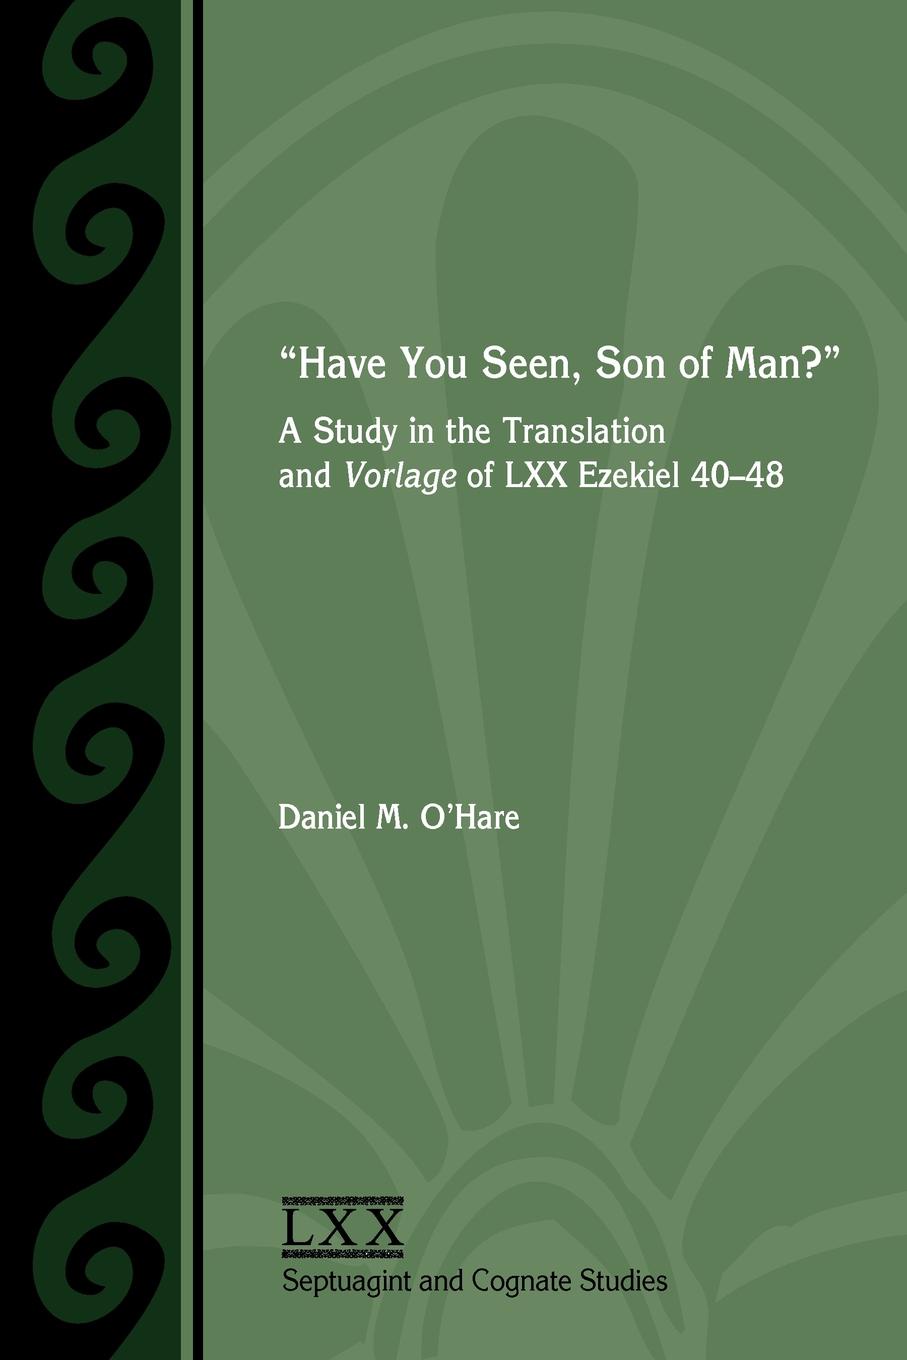 Have You Seen, Son of Man?. A Study of the Translation and Vorlage of LXX Ezekiel 40-48